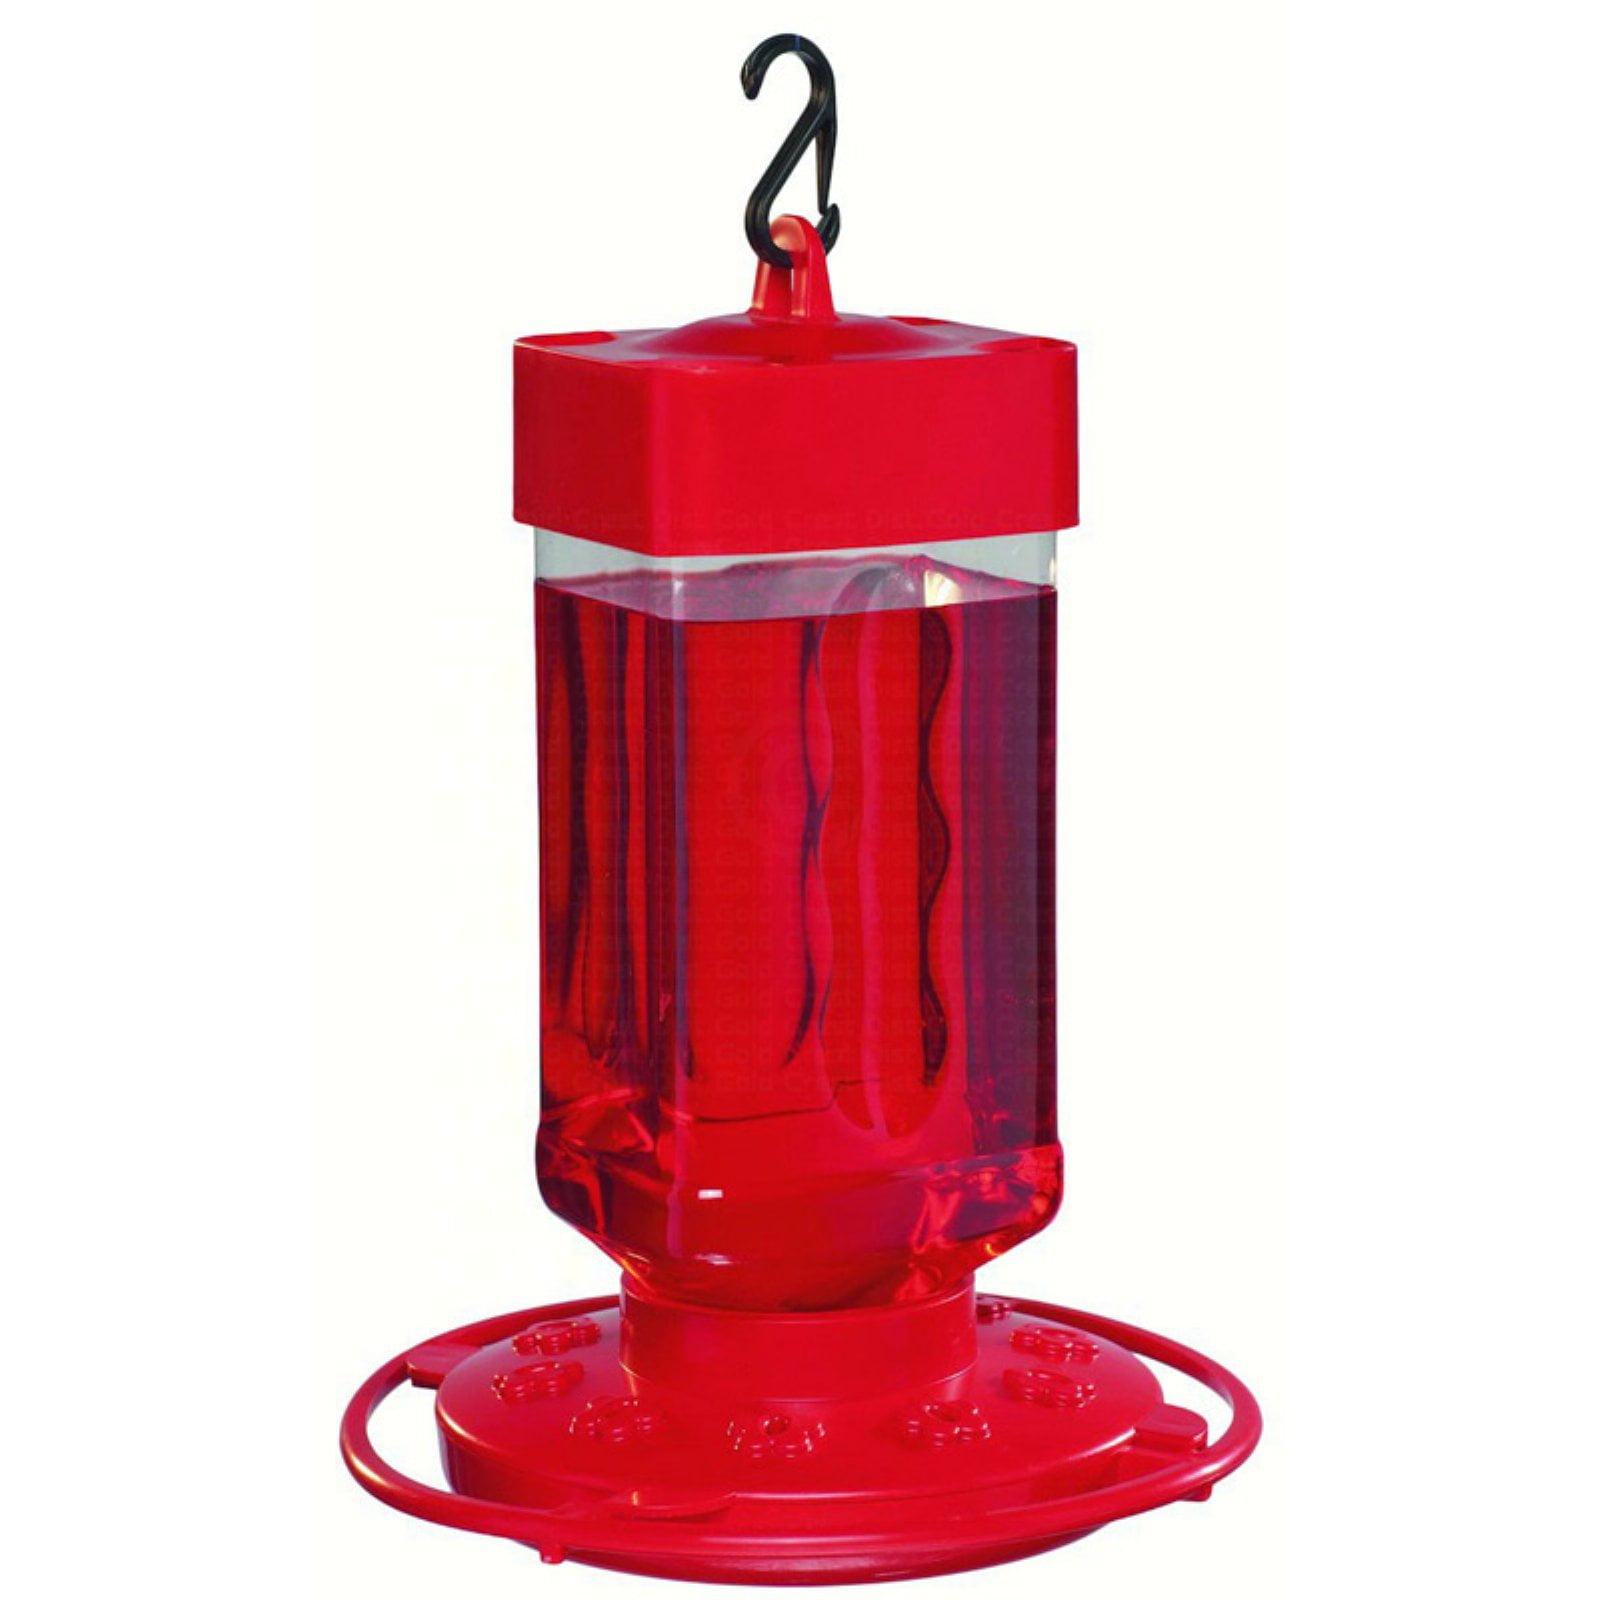 First Nature 16oz Red Hummingbird Feeder #3051 10 Ports w/ Red Trap-It Ant Moat 